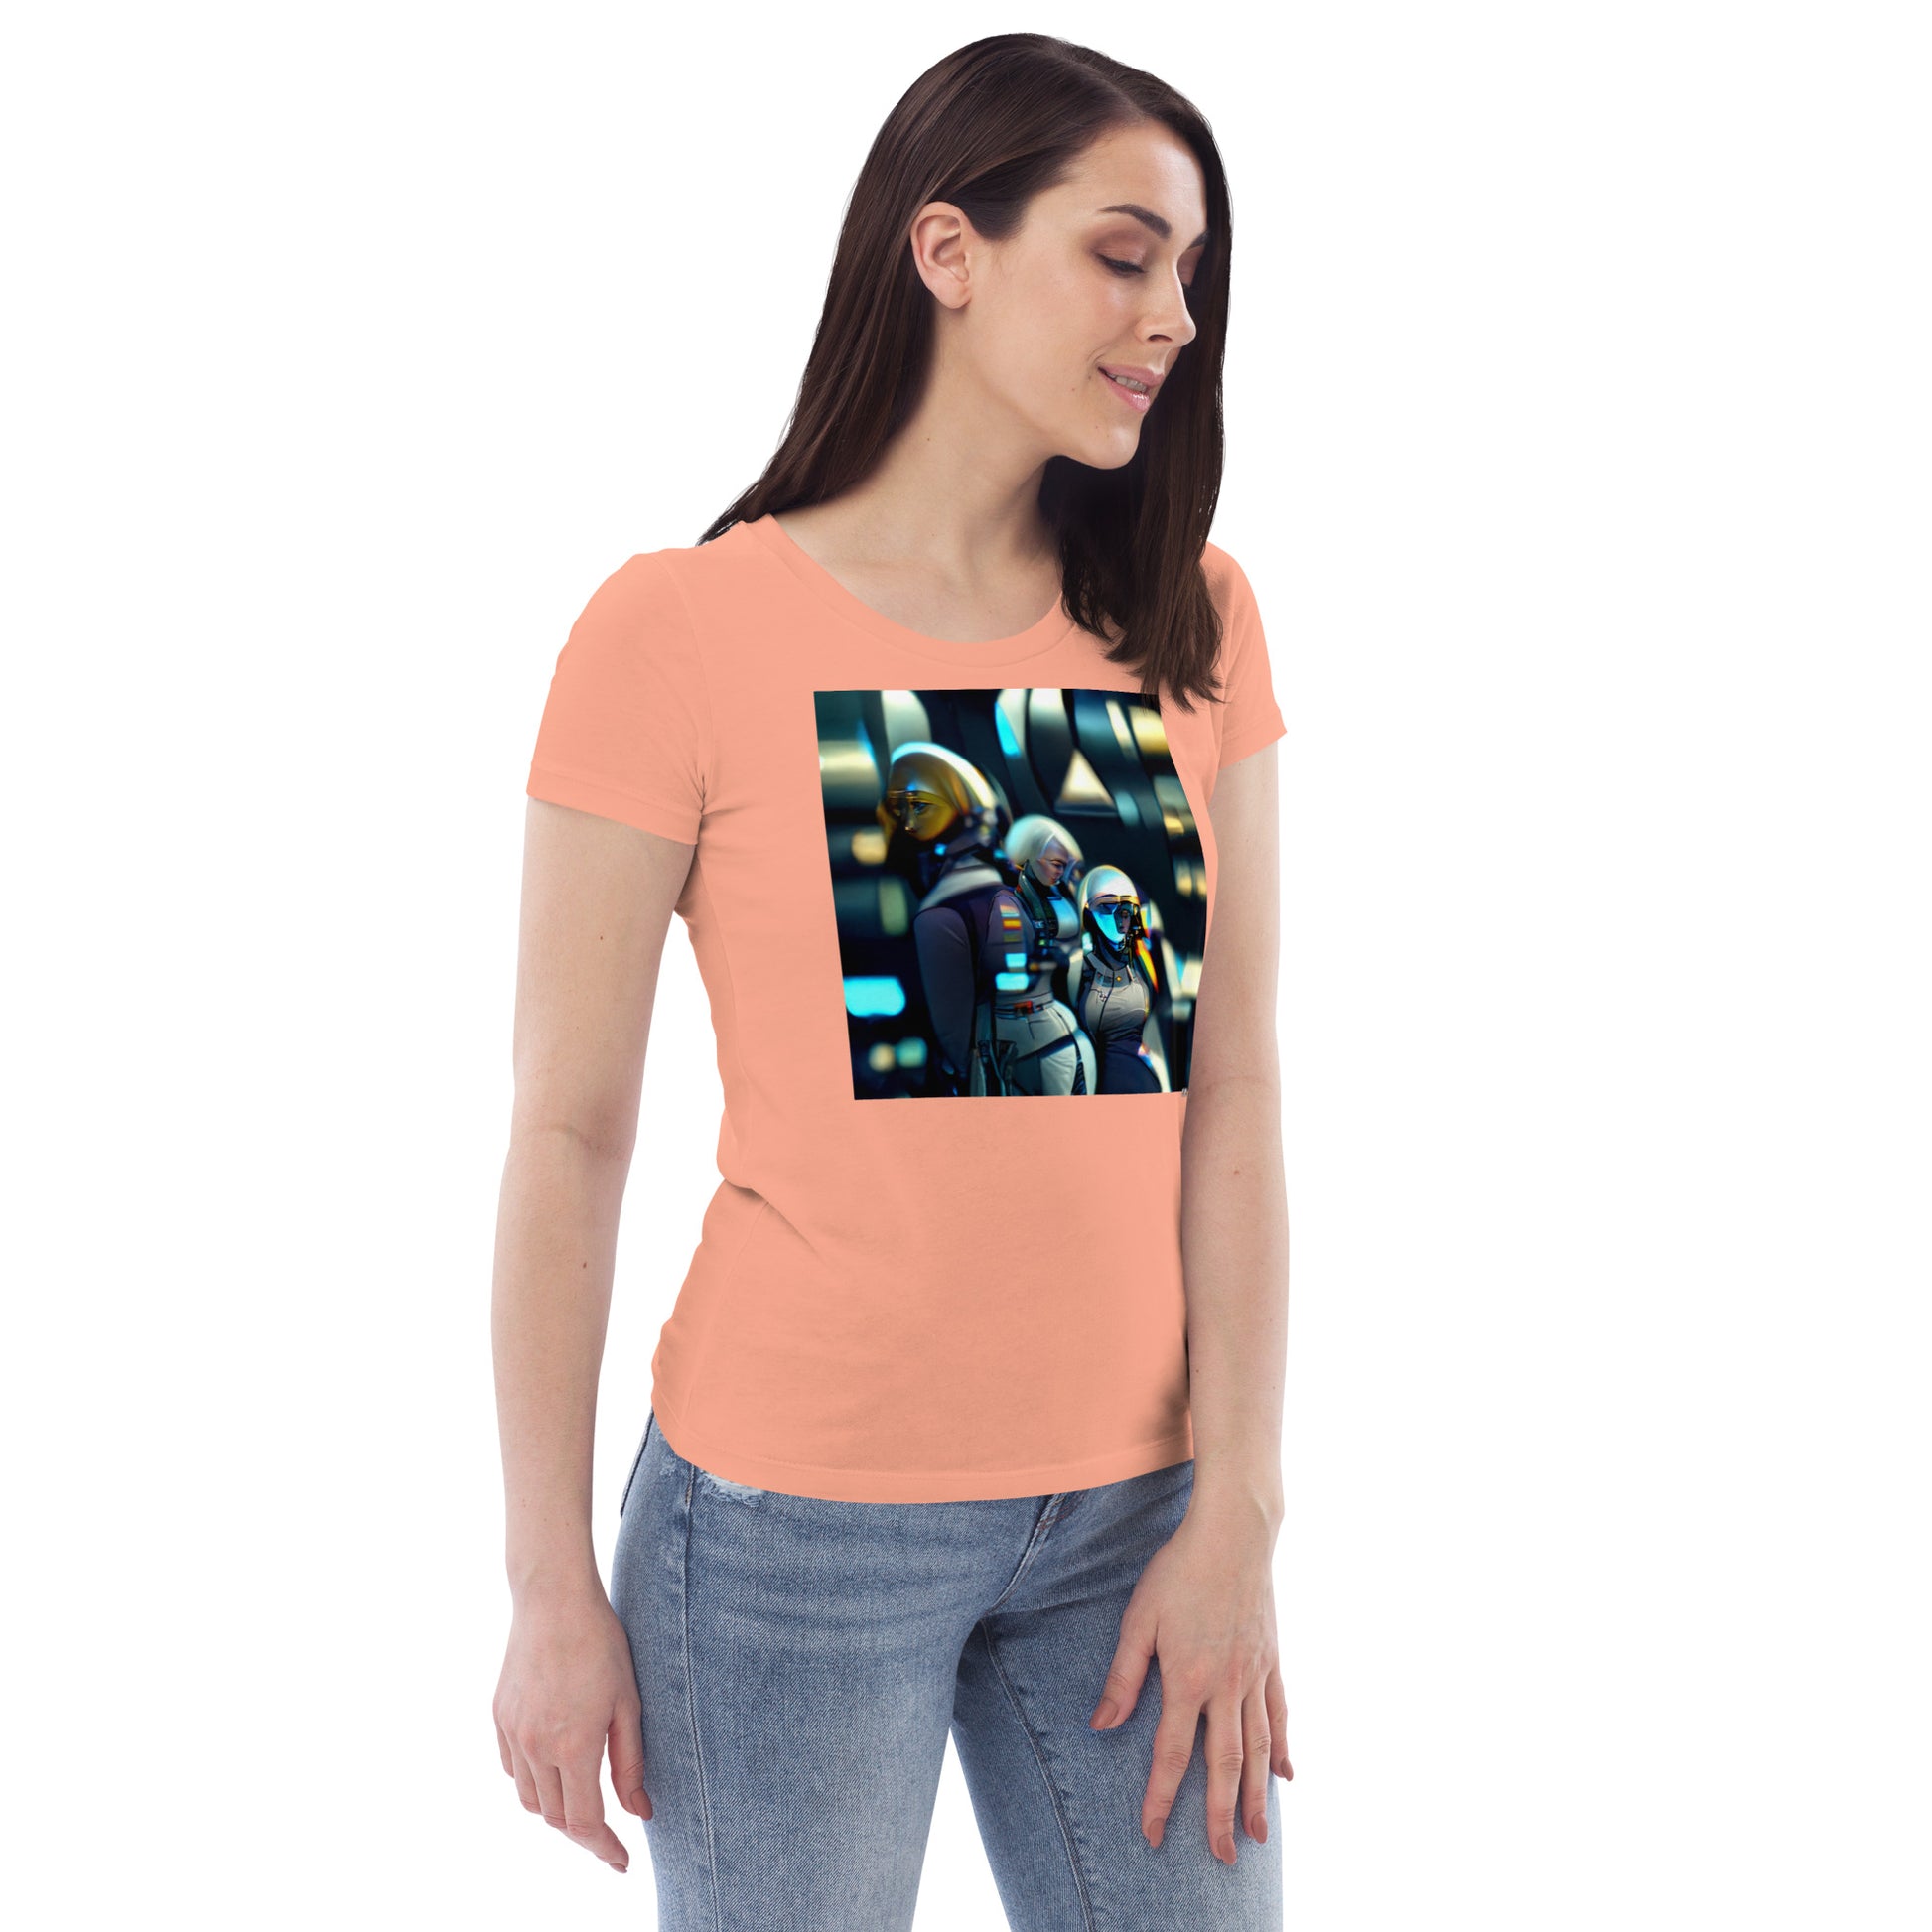 Fall 2022 - Women's fitted eco tee - Spoiled Robots